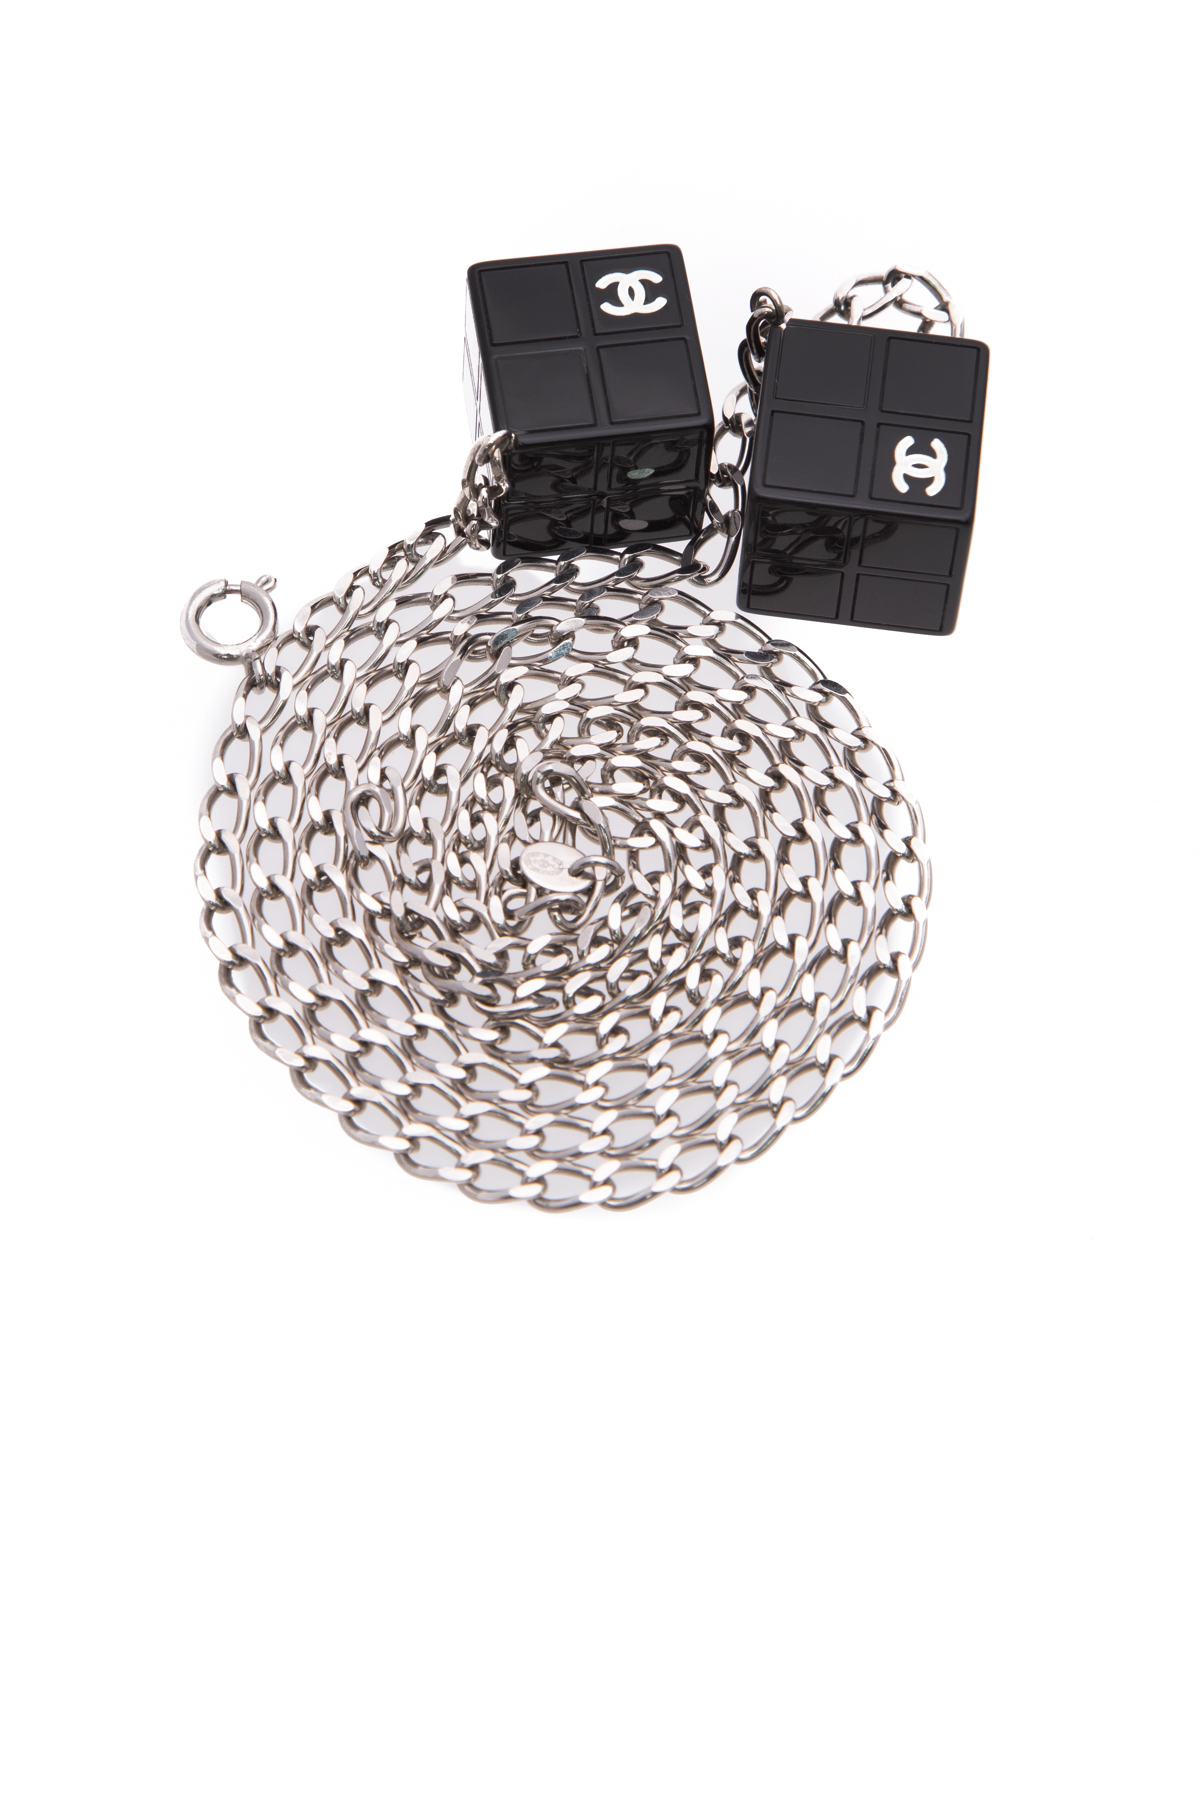 Chanel Vintage Cube Chain Belt - Couture USA